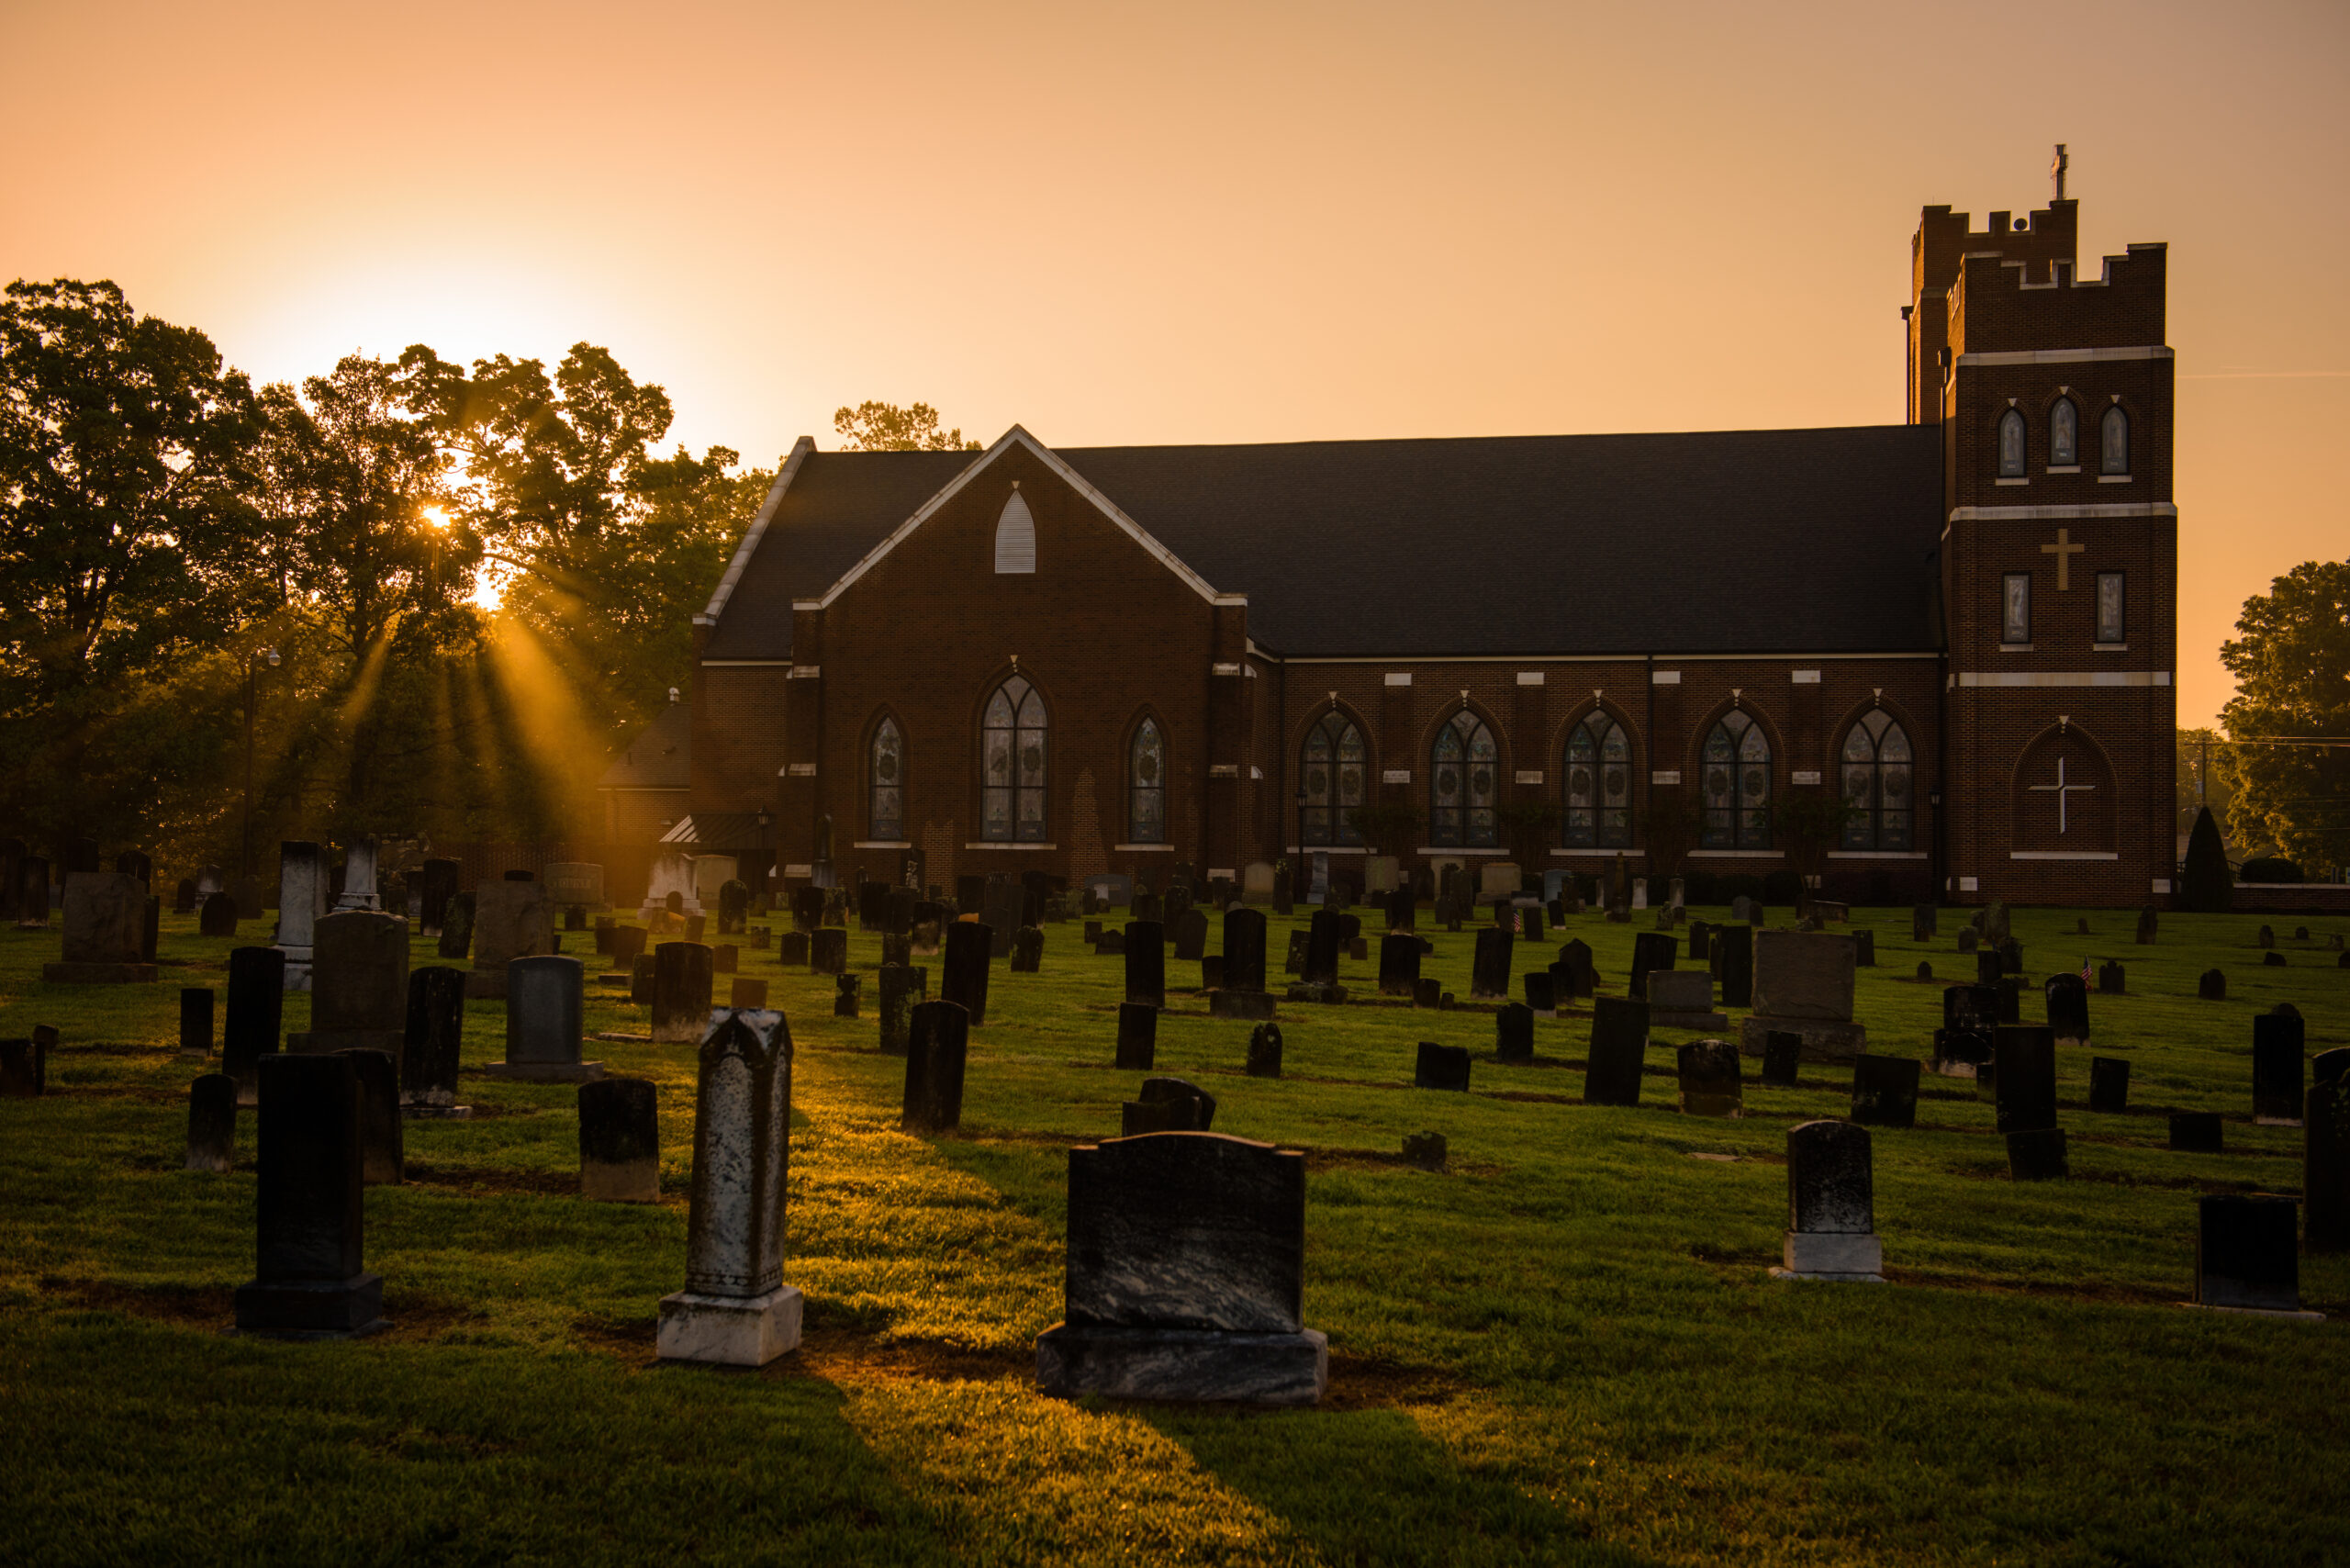 Sunrise over the cemetery at St. John's Lutheran Church, Conover, N.C, on Saturday, April 22, 2017, in Hickory, N.C. LCMS Communications/Erik M. Lunsford Sunrise over the cemetery at St. John's Lutheran Church, Conover, N.C, on Saturday, April 22, 2017. LCMS Communications/Erik M. Lunsford